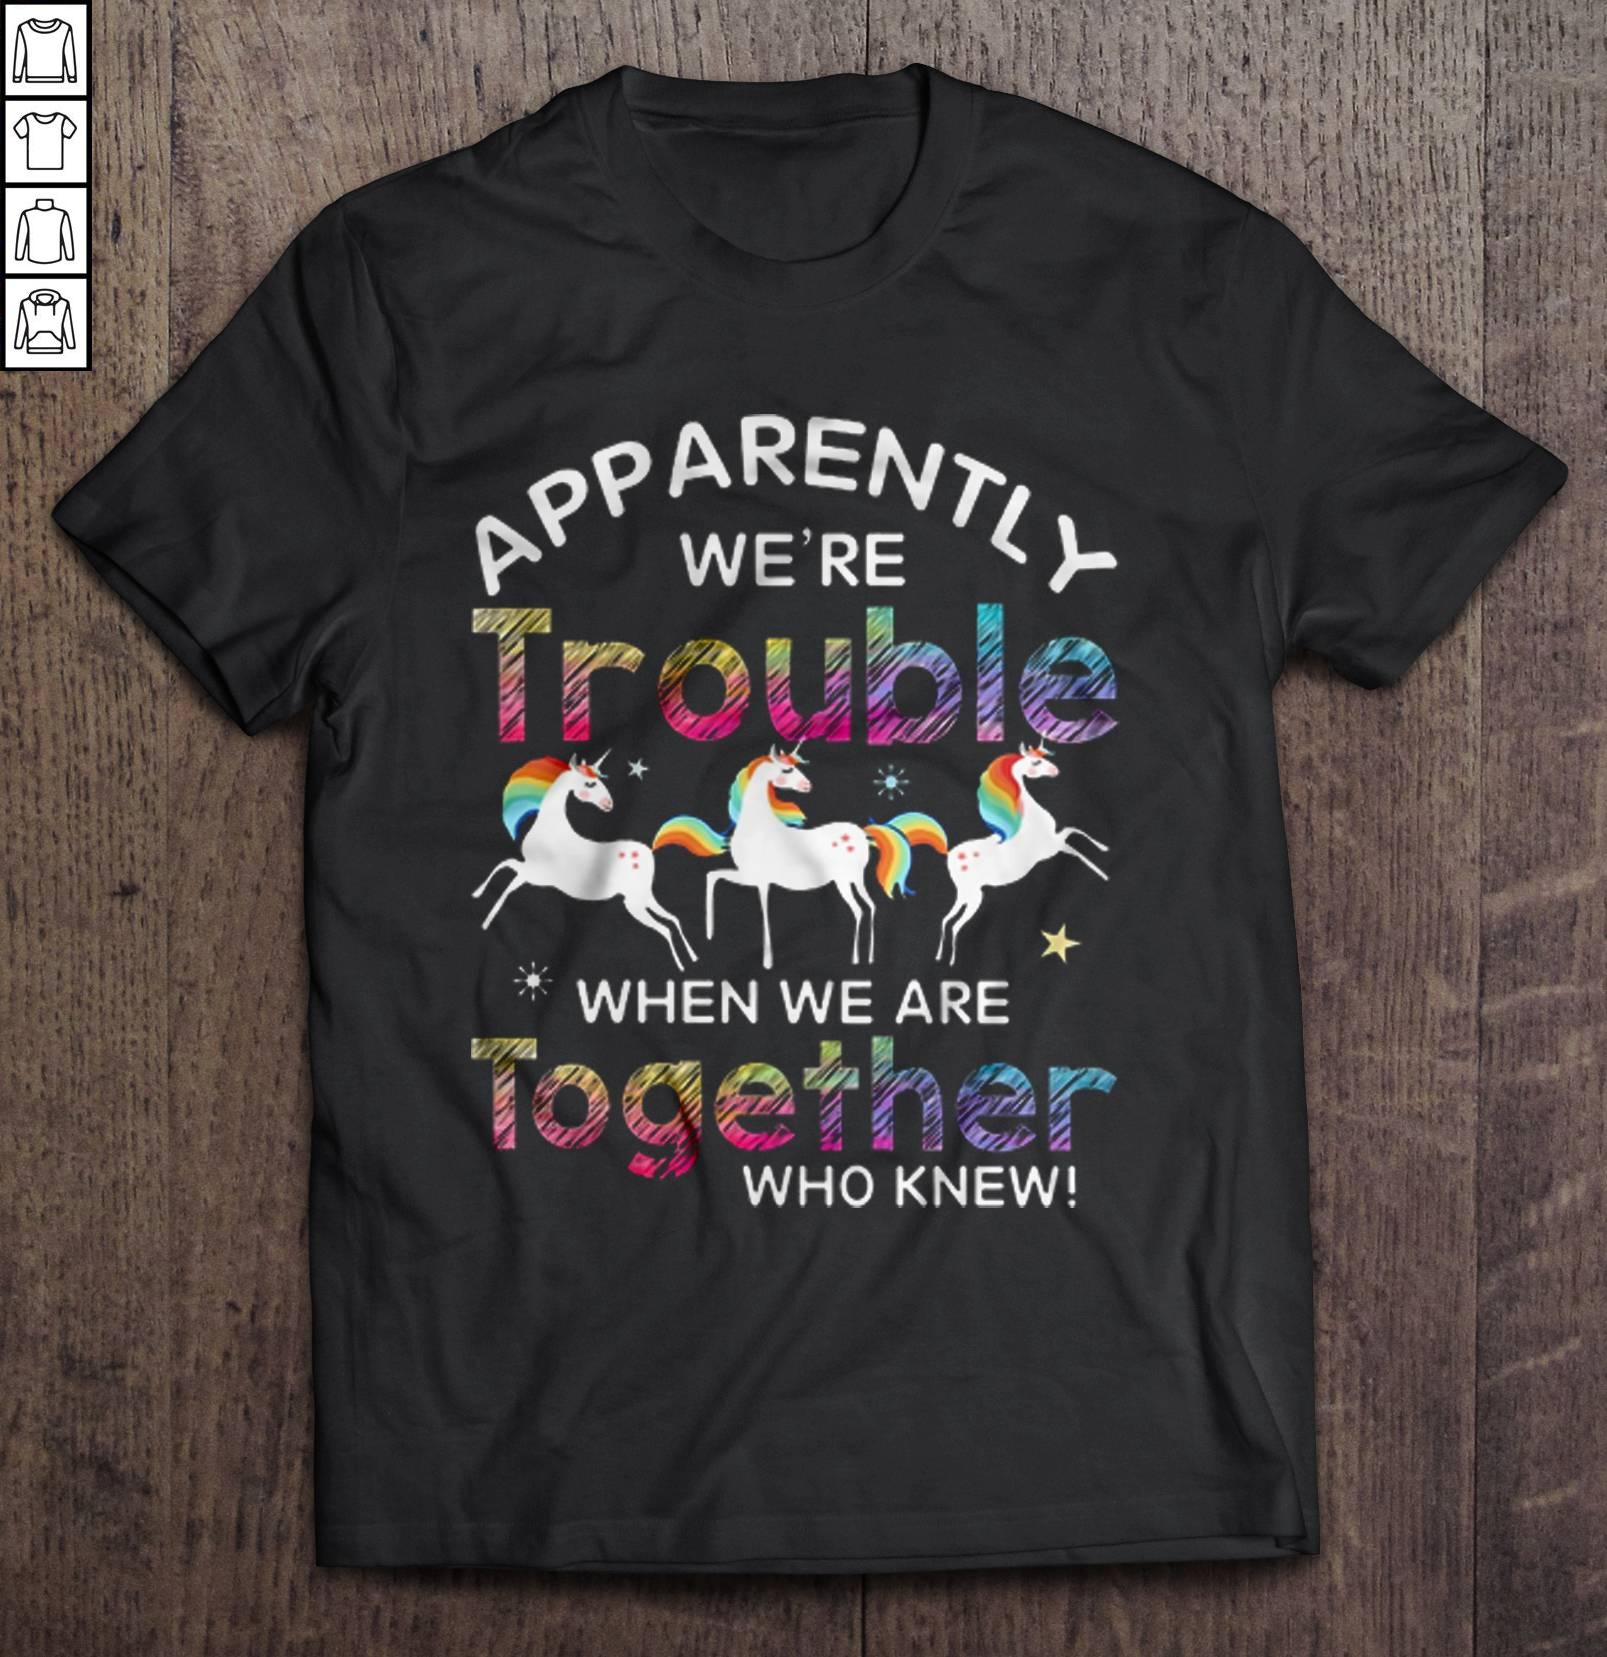 Apparently We’re Trouble When We Are Together Who Knew Unicorn TShirt